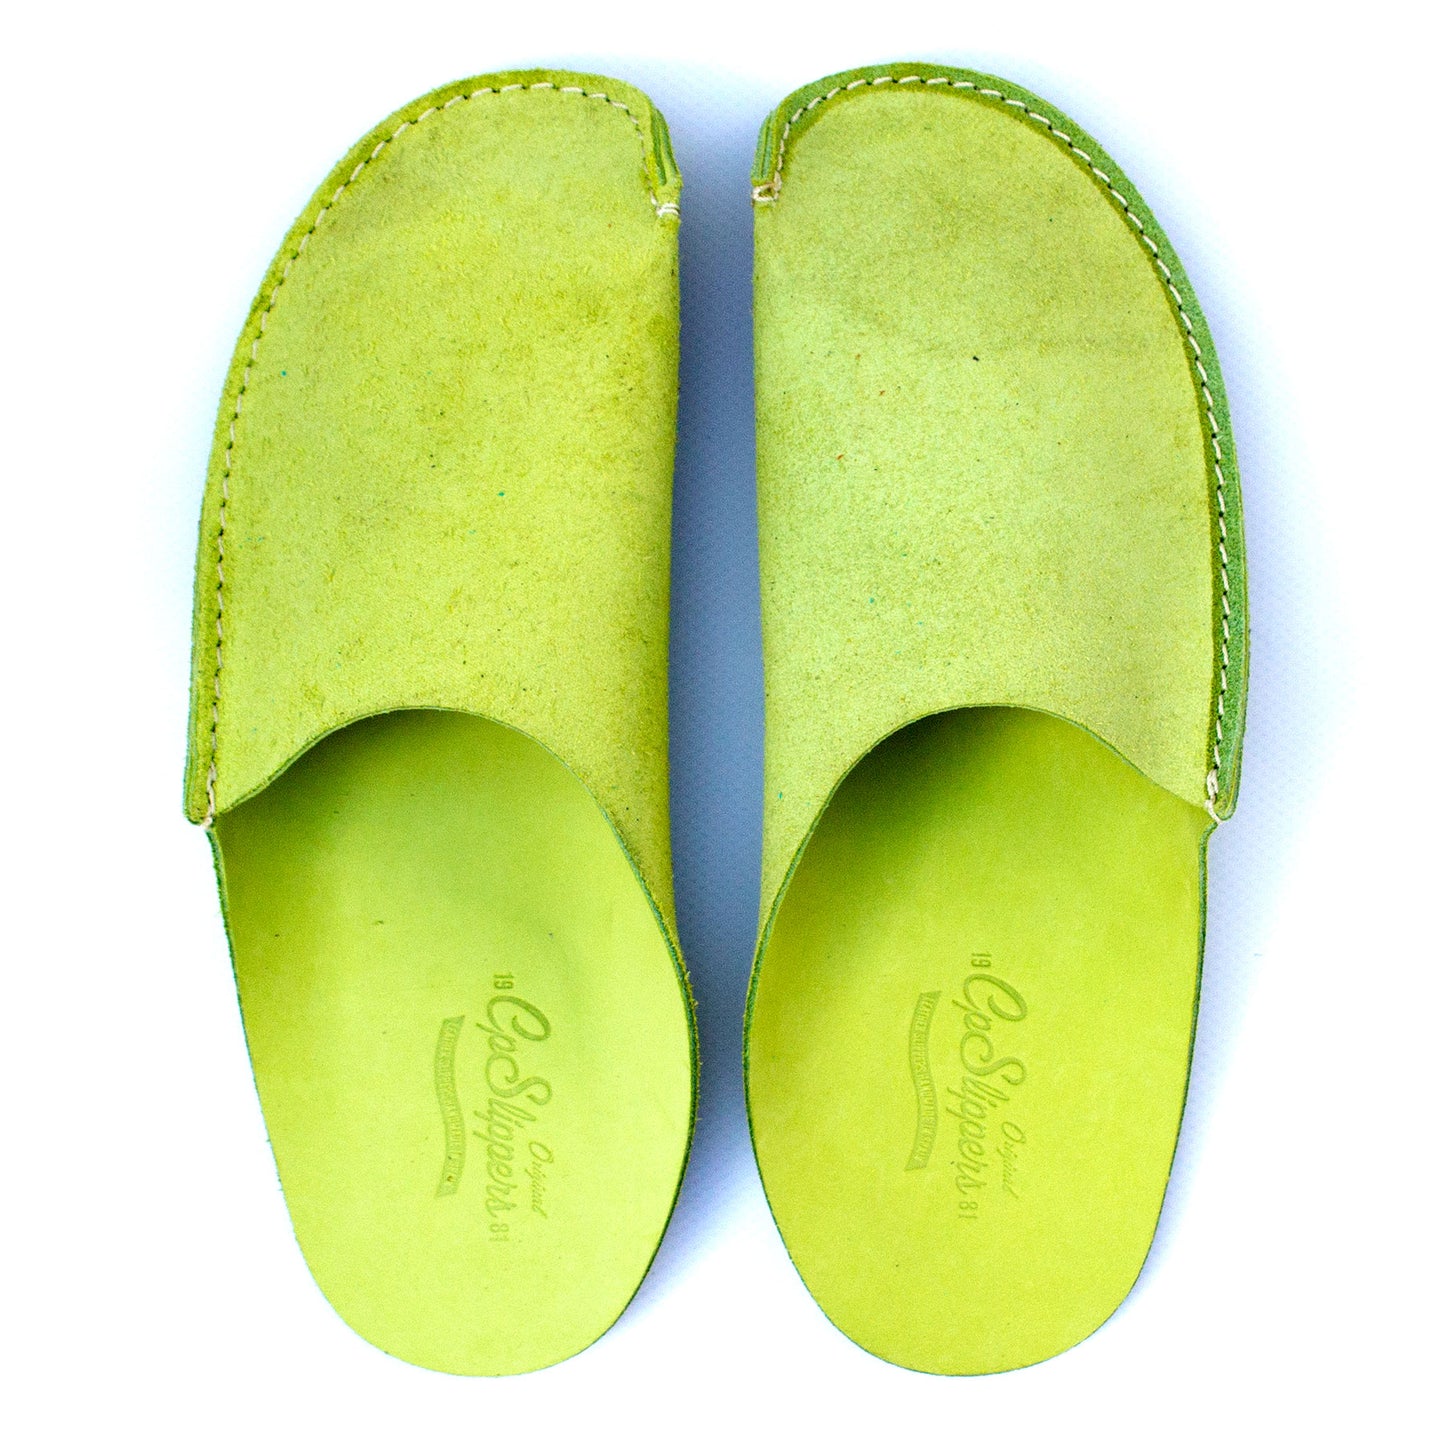 Green CP Slippers minimalist for man and woman